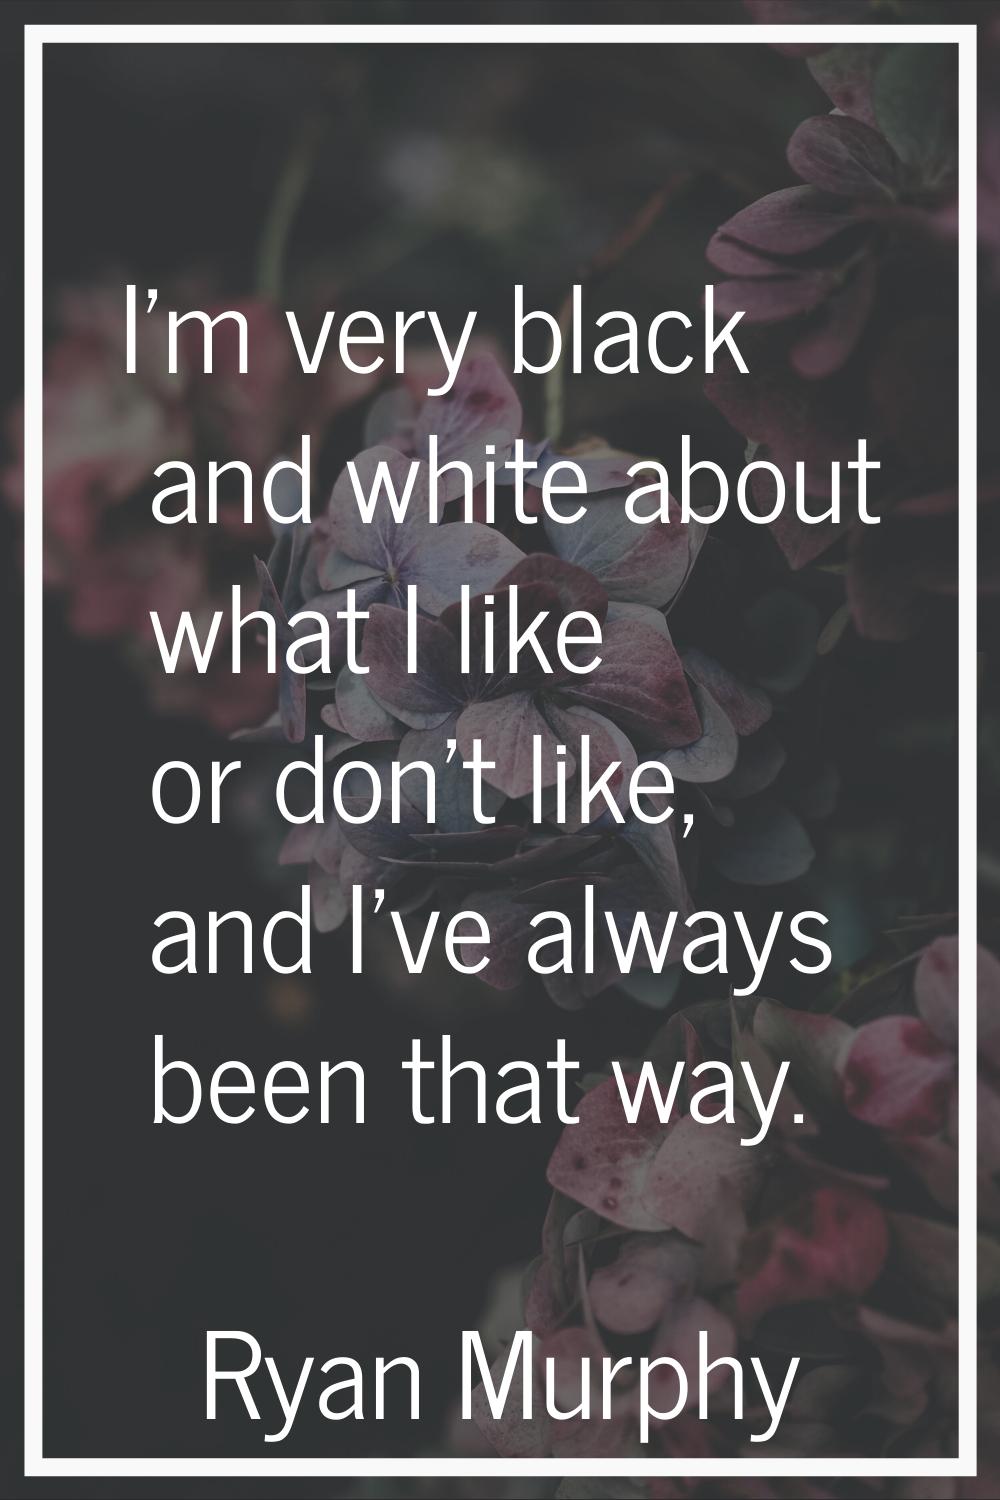 I'm very black and white about what I like or don't like, and I've always been that way.